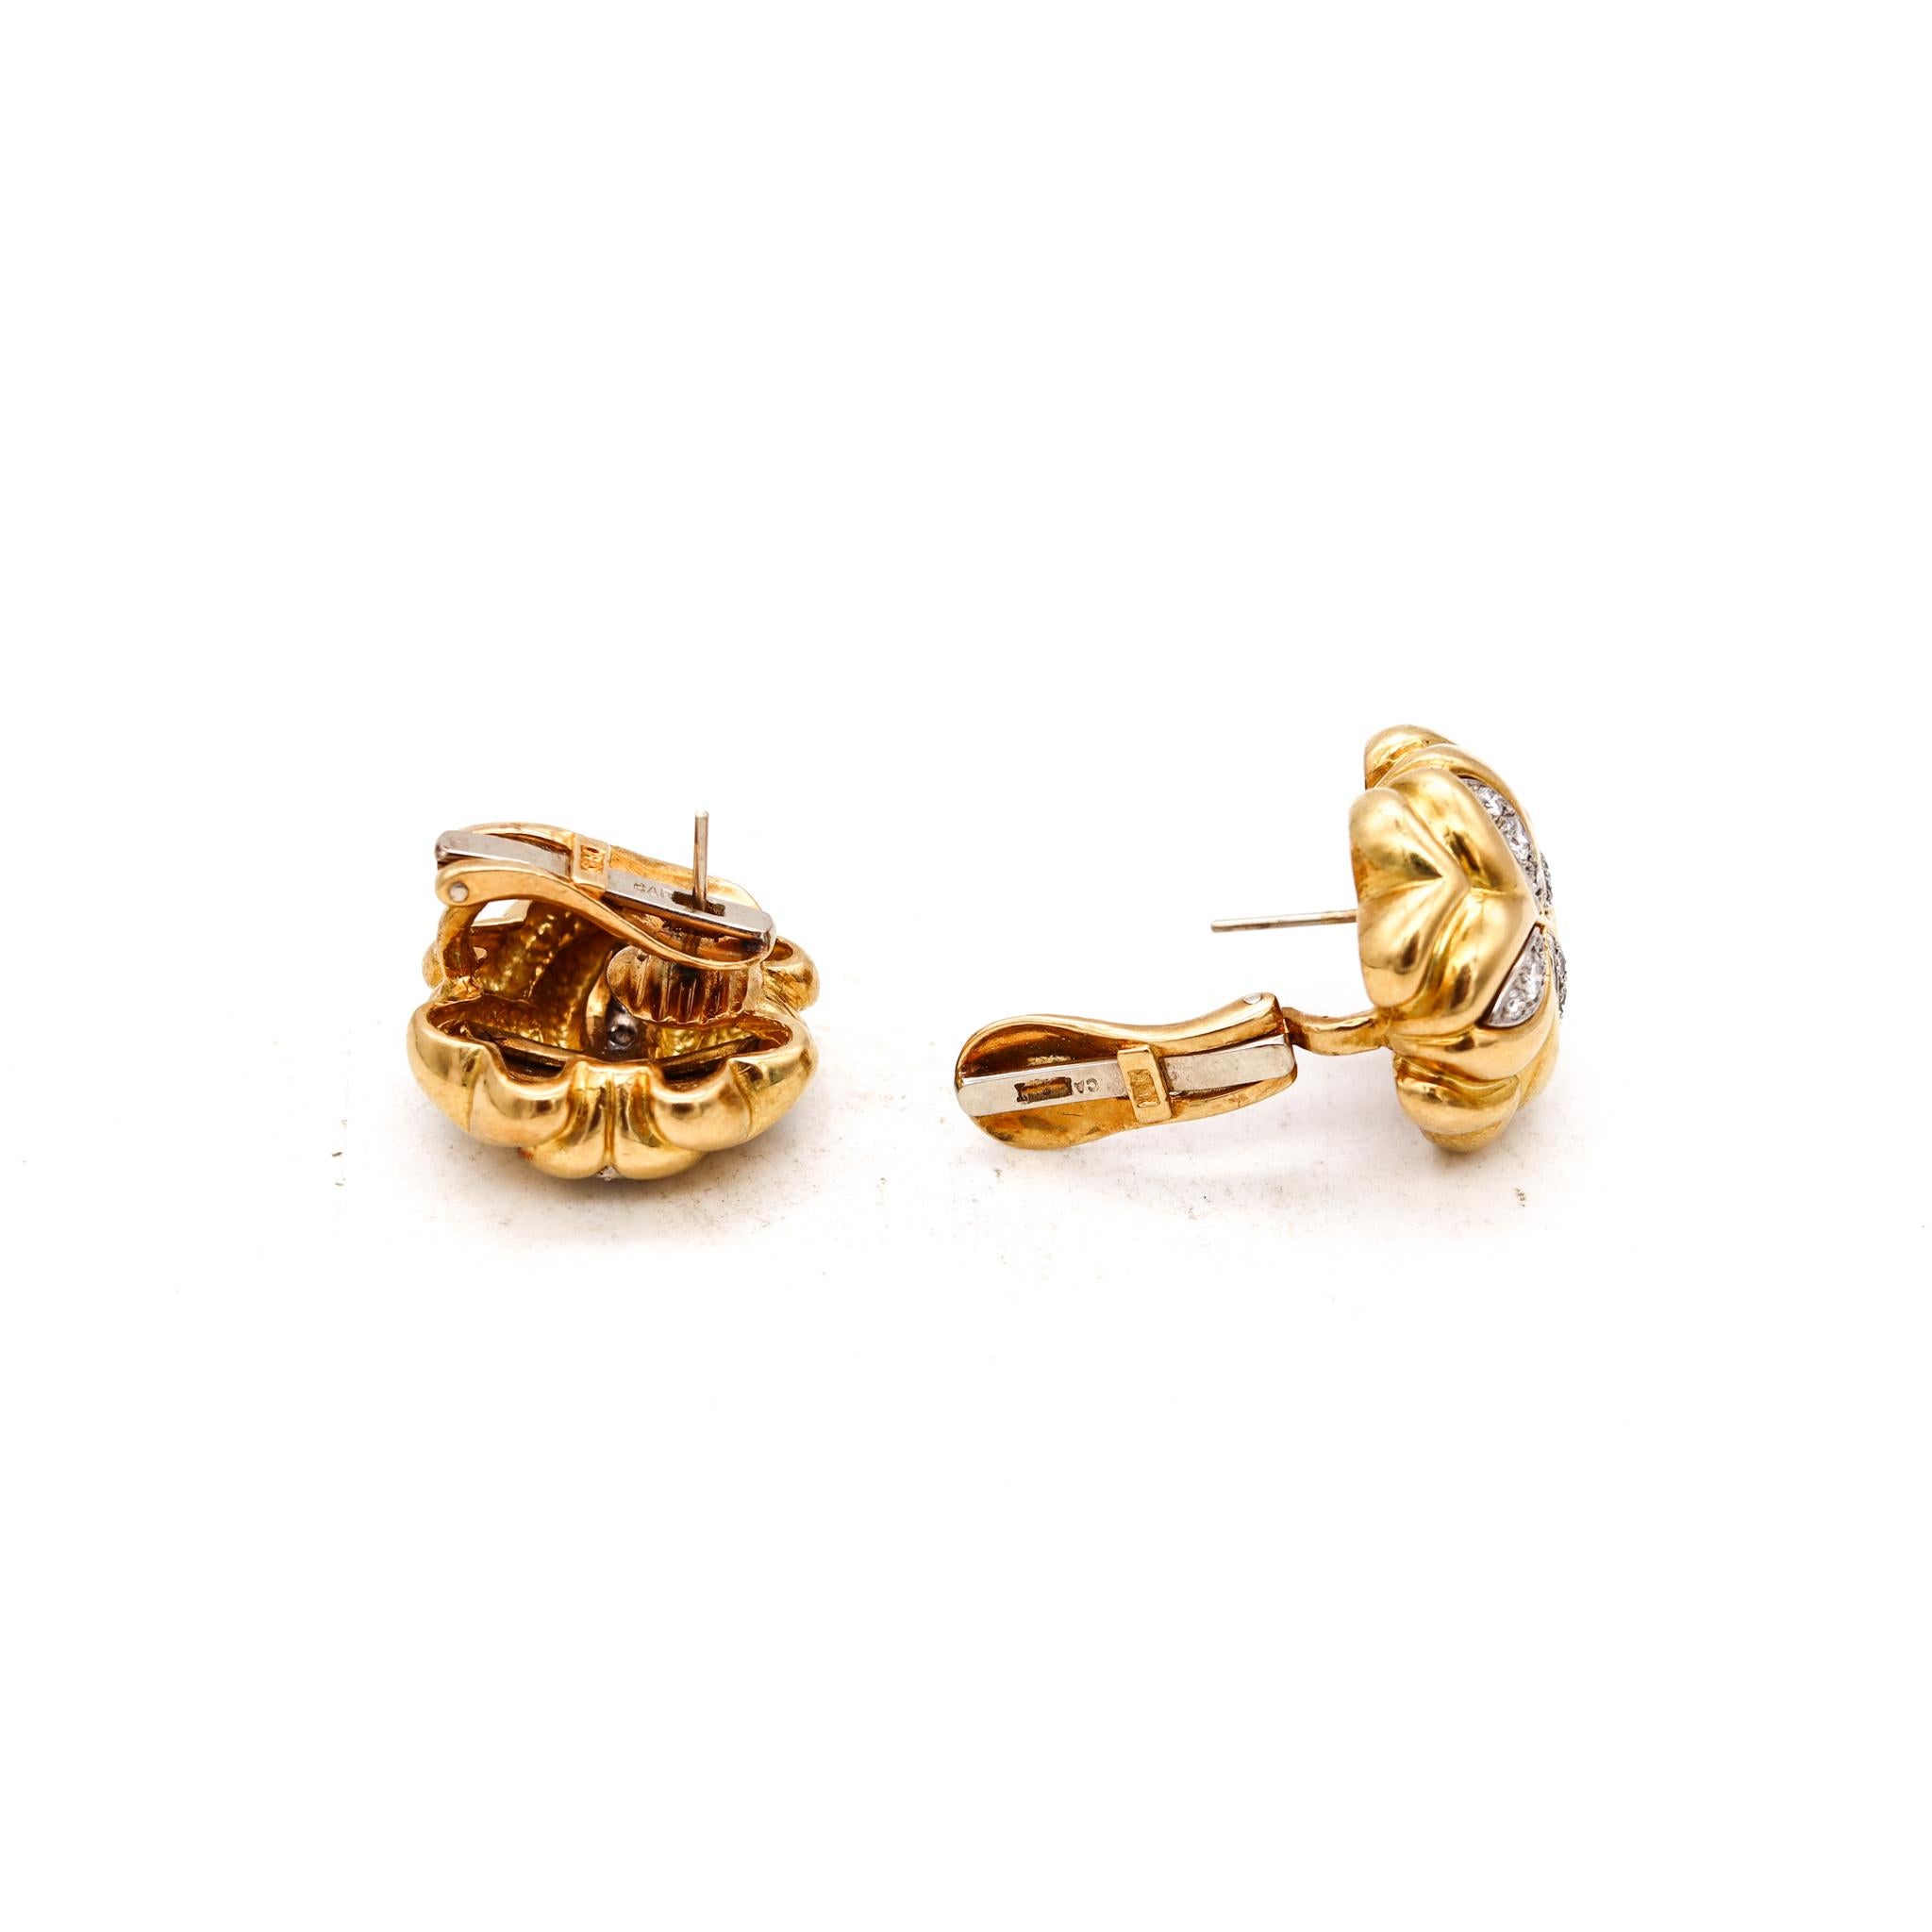 Briolette Cut Cartier 1970 Pair of Clovers Clips Earrings in 18Kt Yellow Gold with VS Diamonds